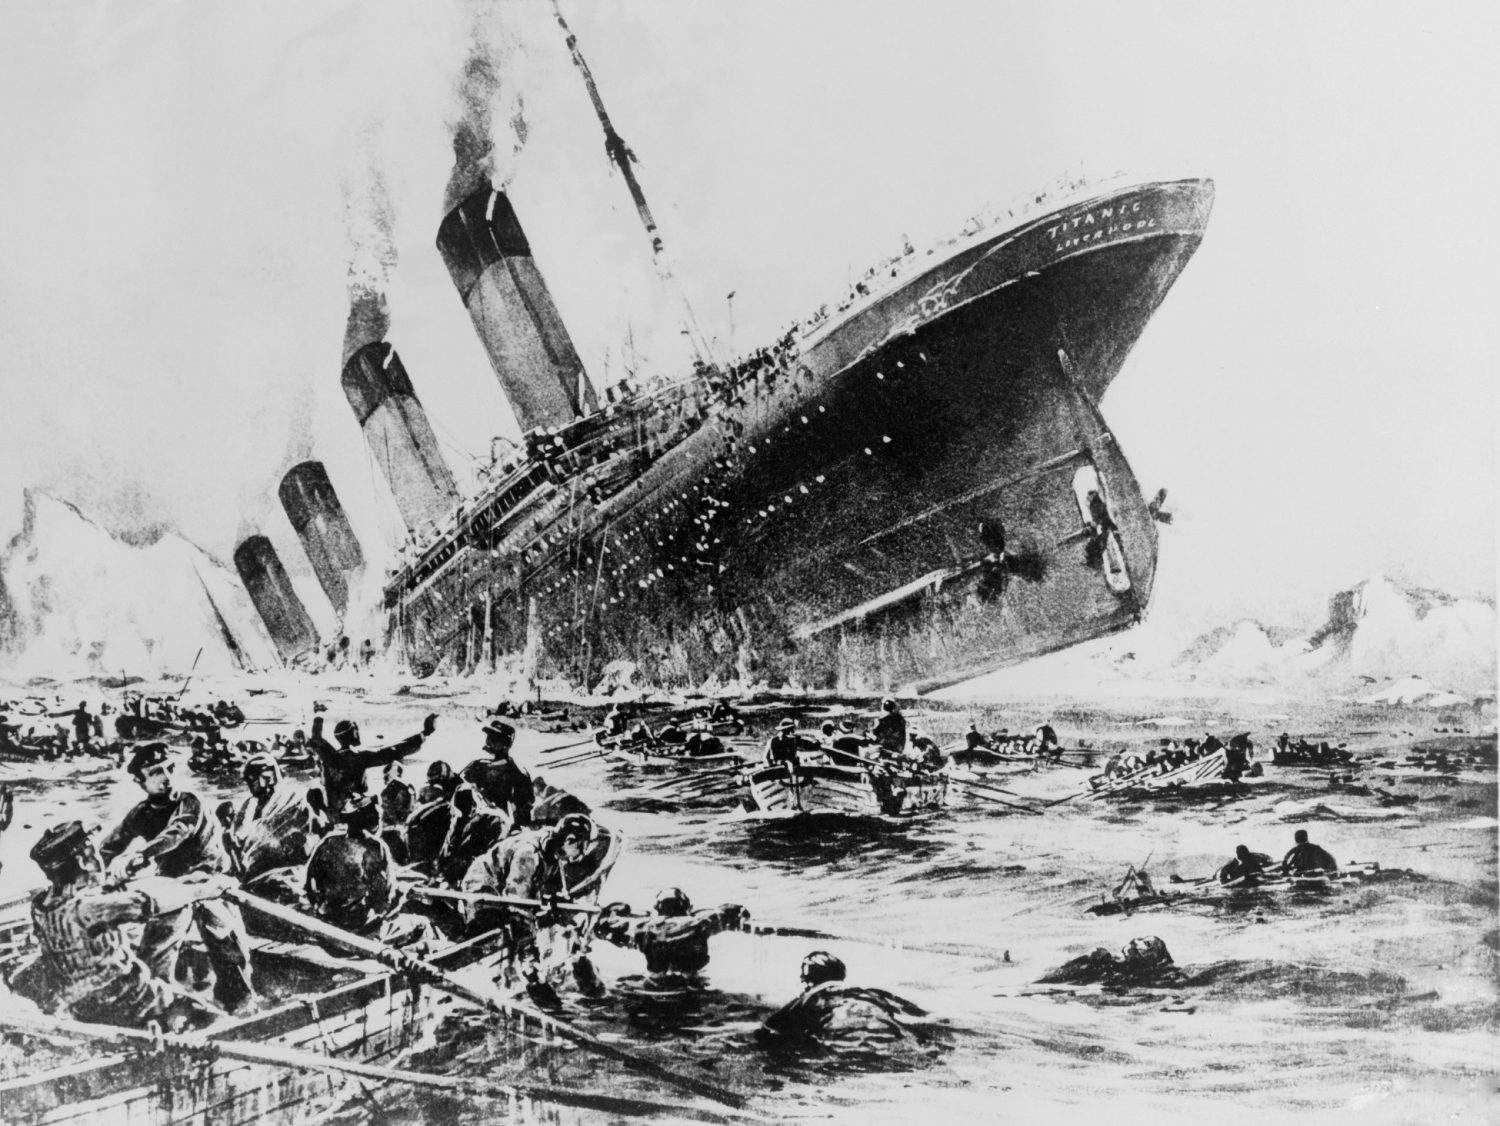 Reflections on the Root Causes of the Titanic Disaster; 14-15th April 1912  - International Masters Program for Managers